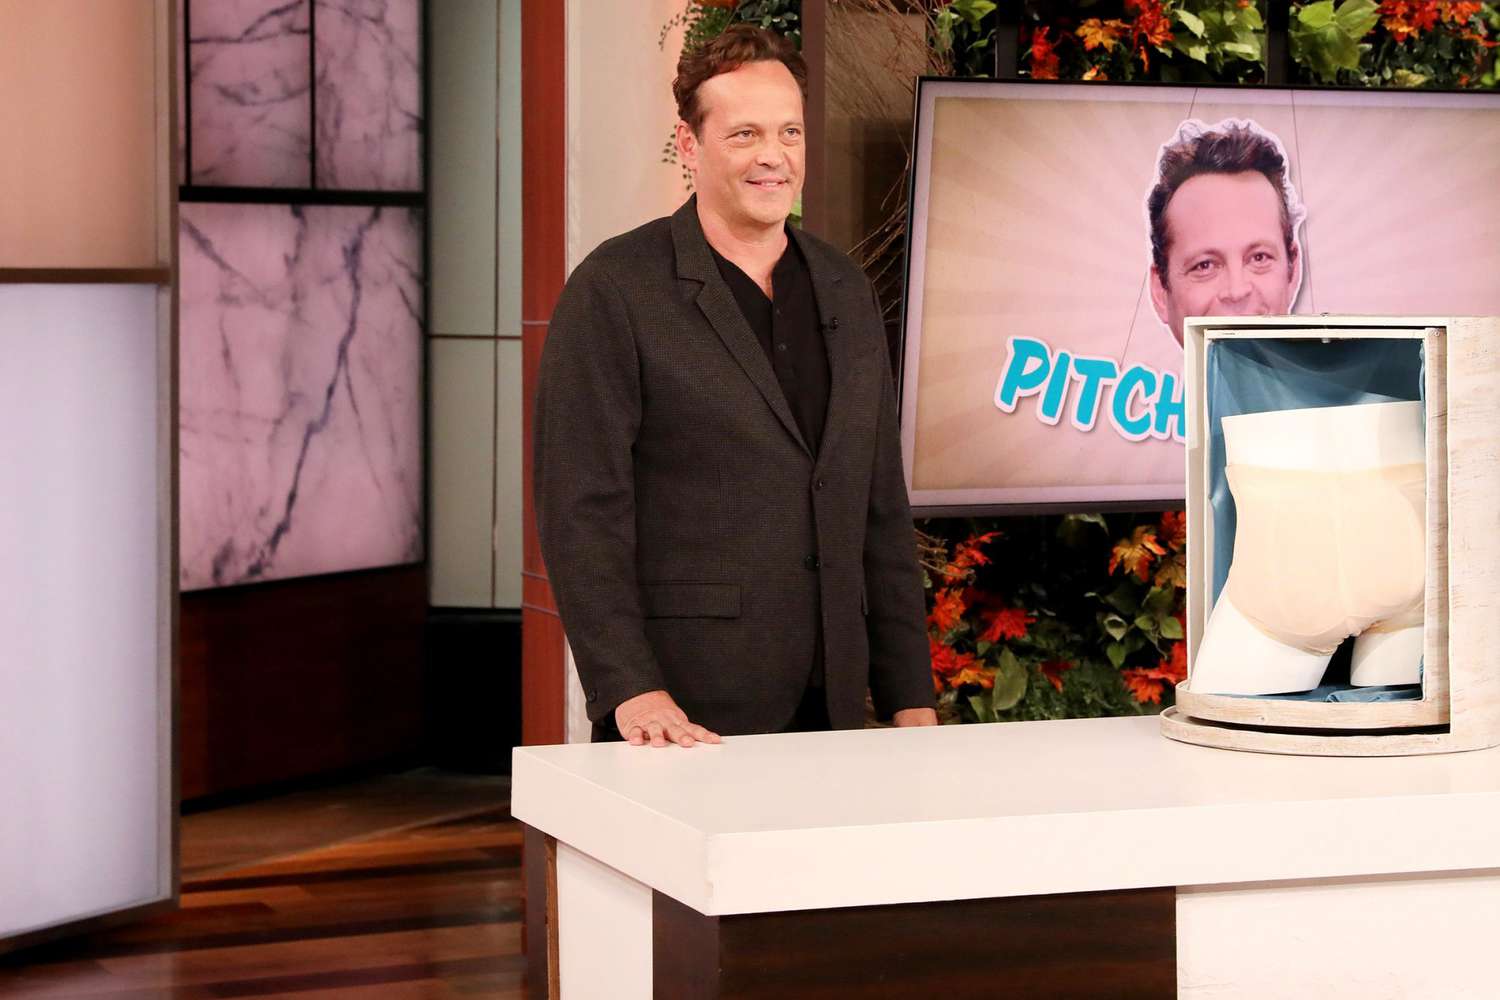 &ldquo;Freaky&rdquo; star Vince Vaughn makes an appearance on &ldquo;The Ellen DeGeneres Show&rdquo; airing Thursday, November 12th, and chats about the new horror film.